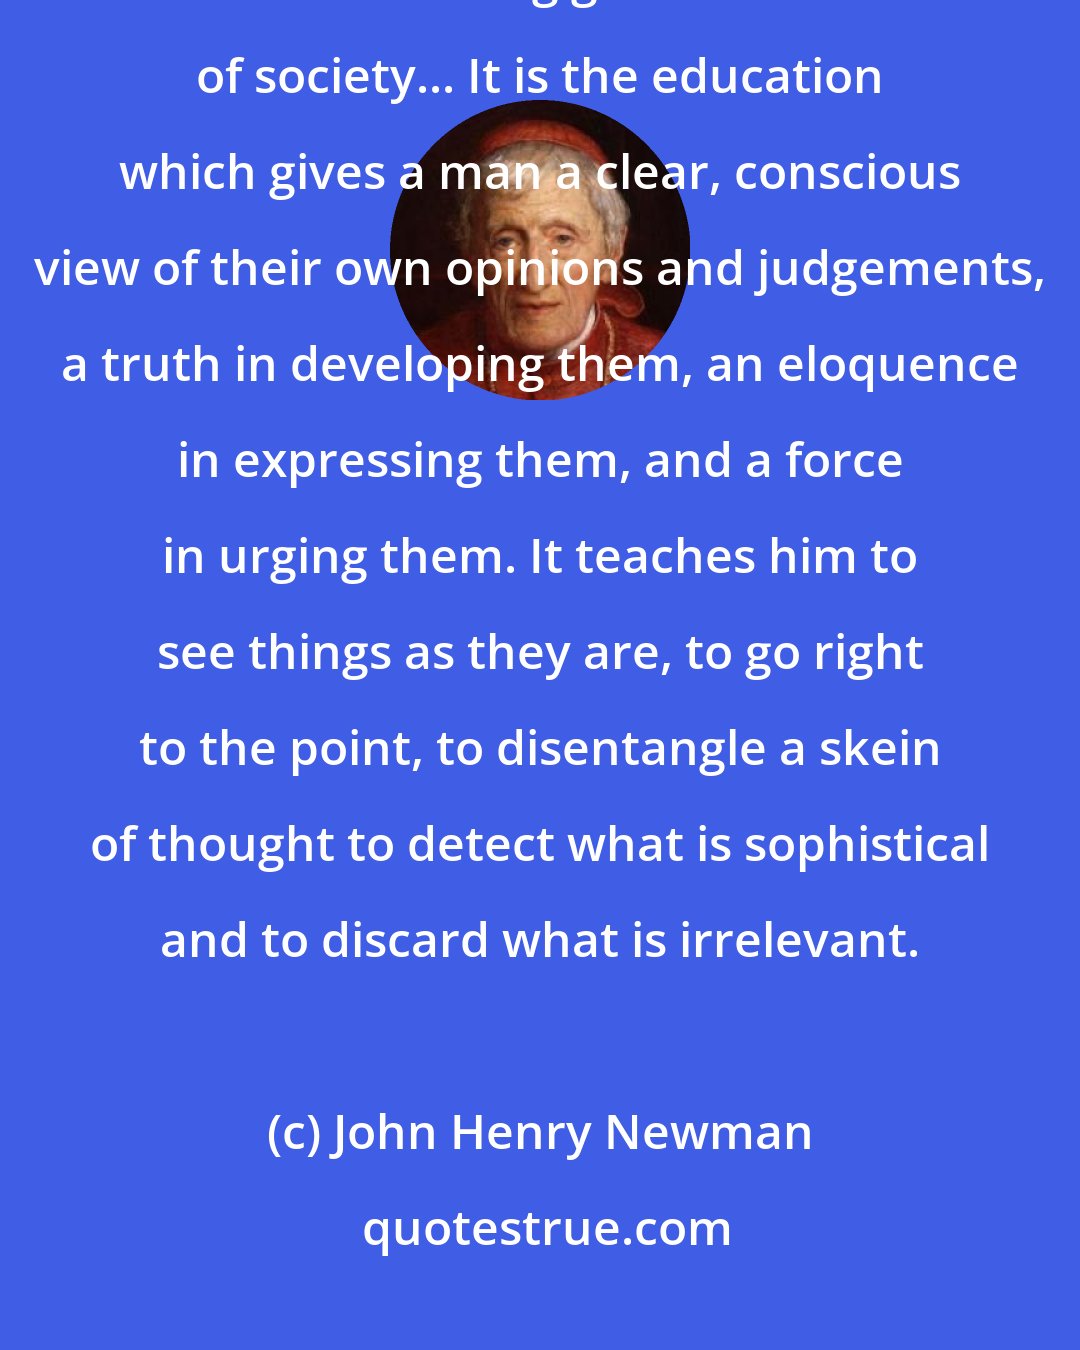 John Henry Newman: If then a practical end must be assigned to a University course, I say it is that of training good members of society... It is the education which gives a man a clear, conscious view of their own opinions and judgements, a truth in developing them, an eloquence in expressing them, and a force in urging them. It teaches him to see things as they are, to go right to the point, to disentangle a skein of thought to detect what is sophistical and to discard what is irrelevant.